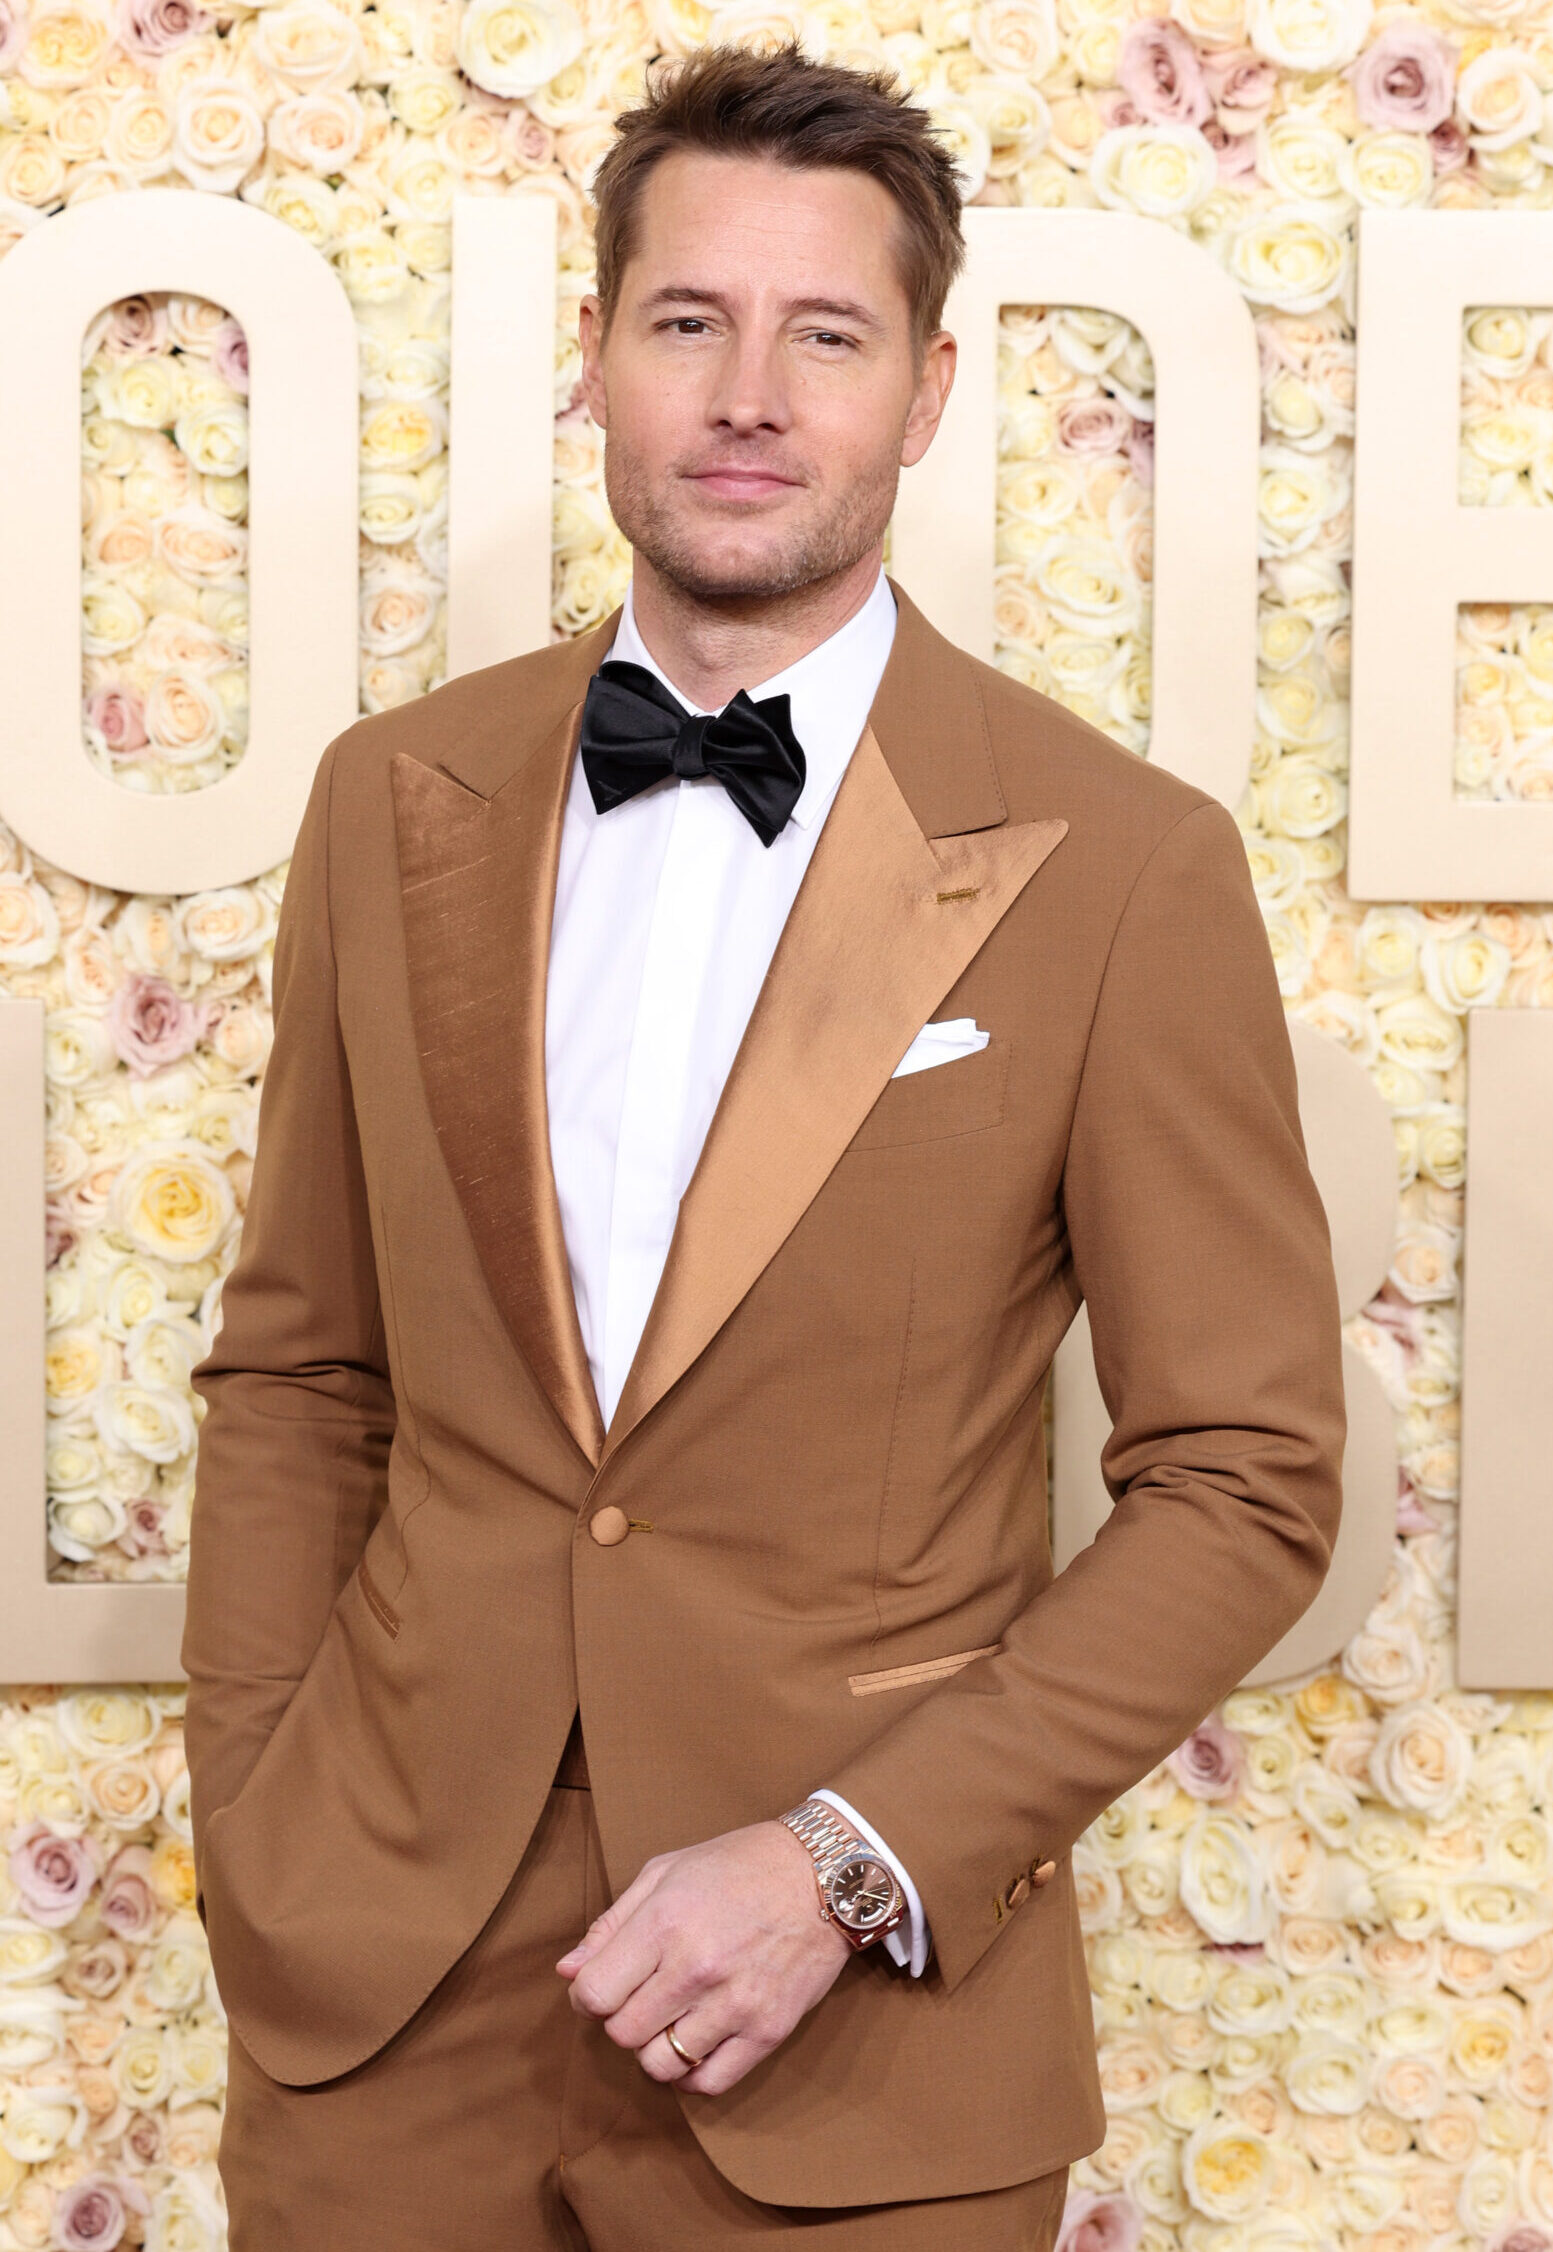 BEVERLY HILLS, CALIFORNIA - JANUARY 07: Justin Hartley attends the 81st Annual Golden Globe Awards at The Beverly Hilton on January 07, 2024 in Beverly Hills, California. (Photo by Kevin Mazur/Getty Images)